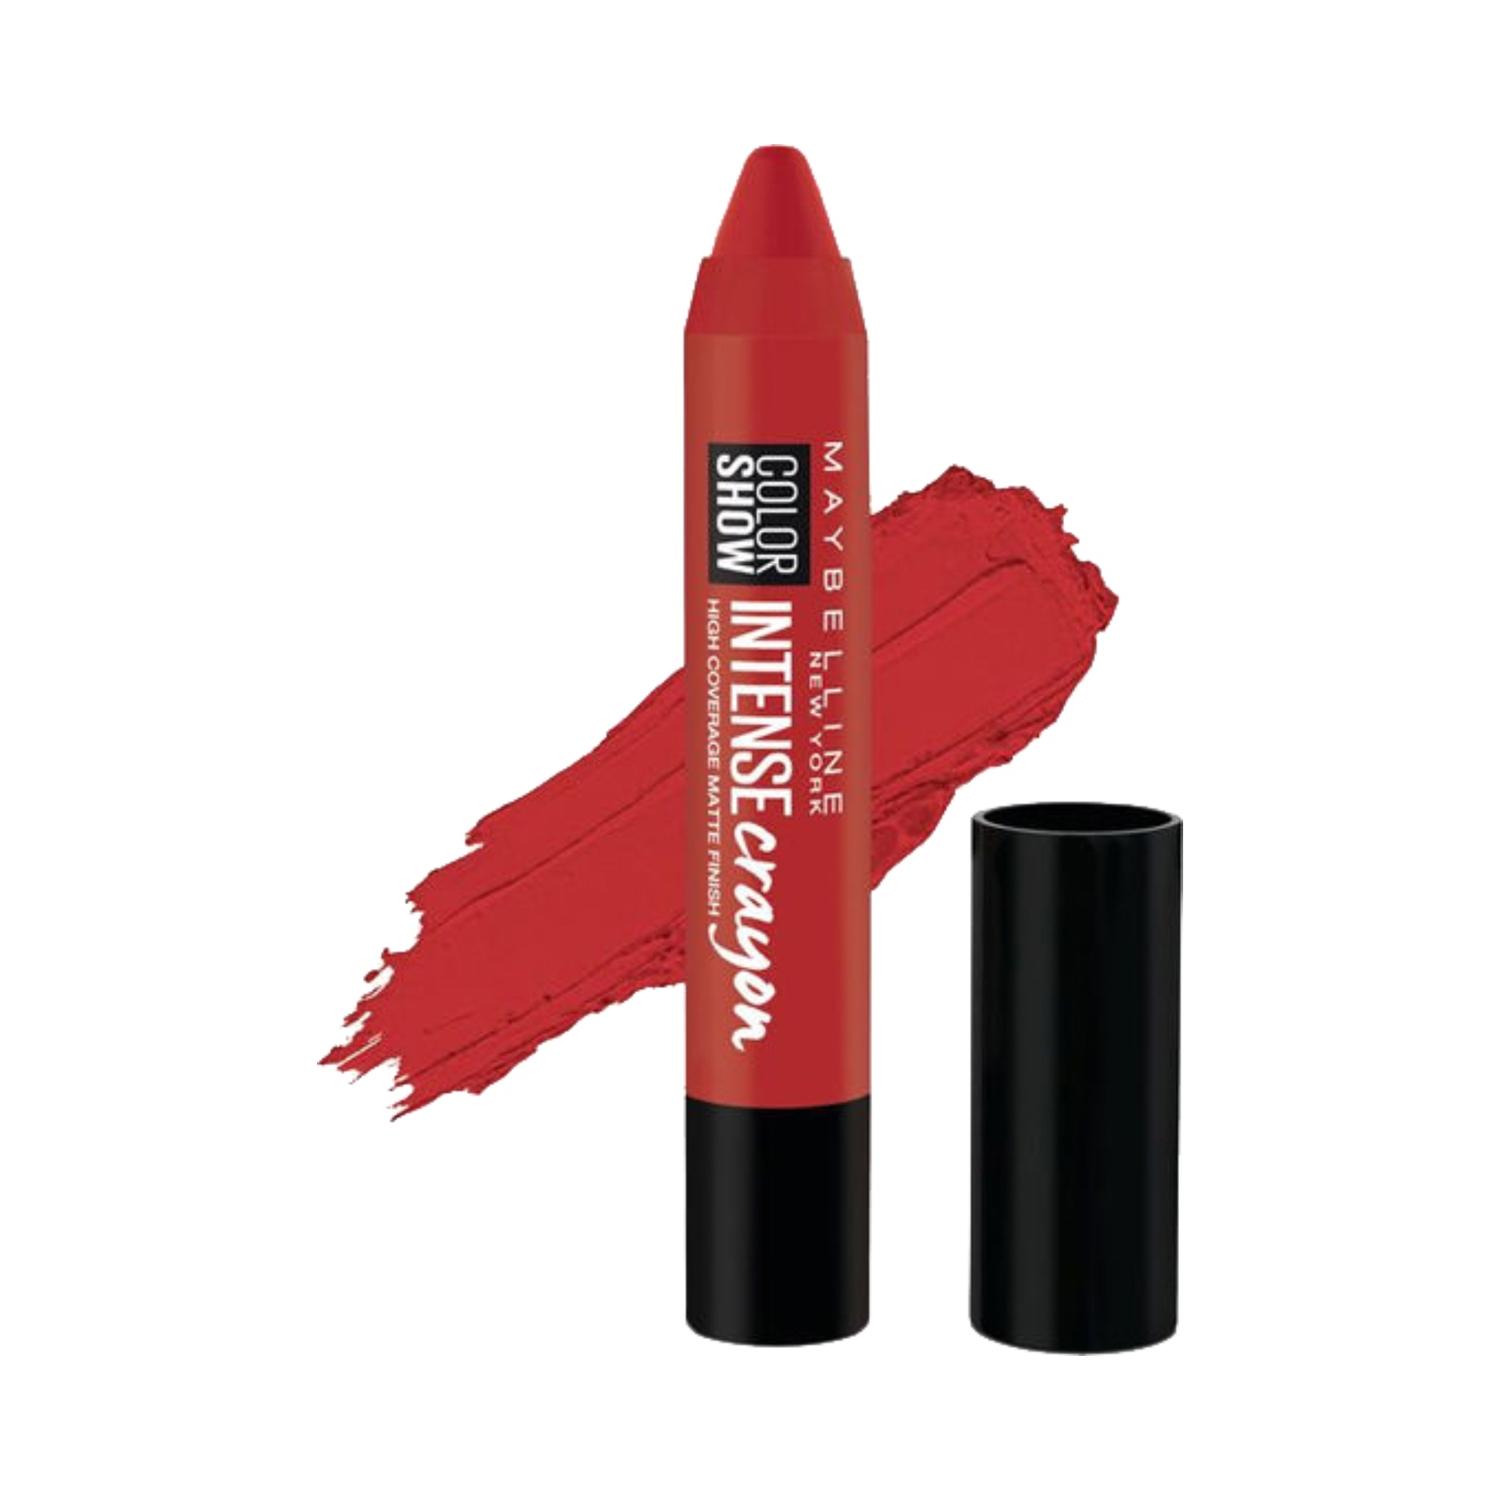 maybelline-new-york-color-show-intense-lip-crayon-spf-17---deep-coral-(3.5g)